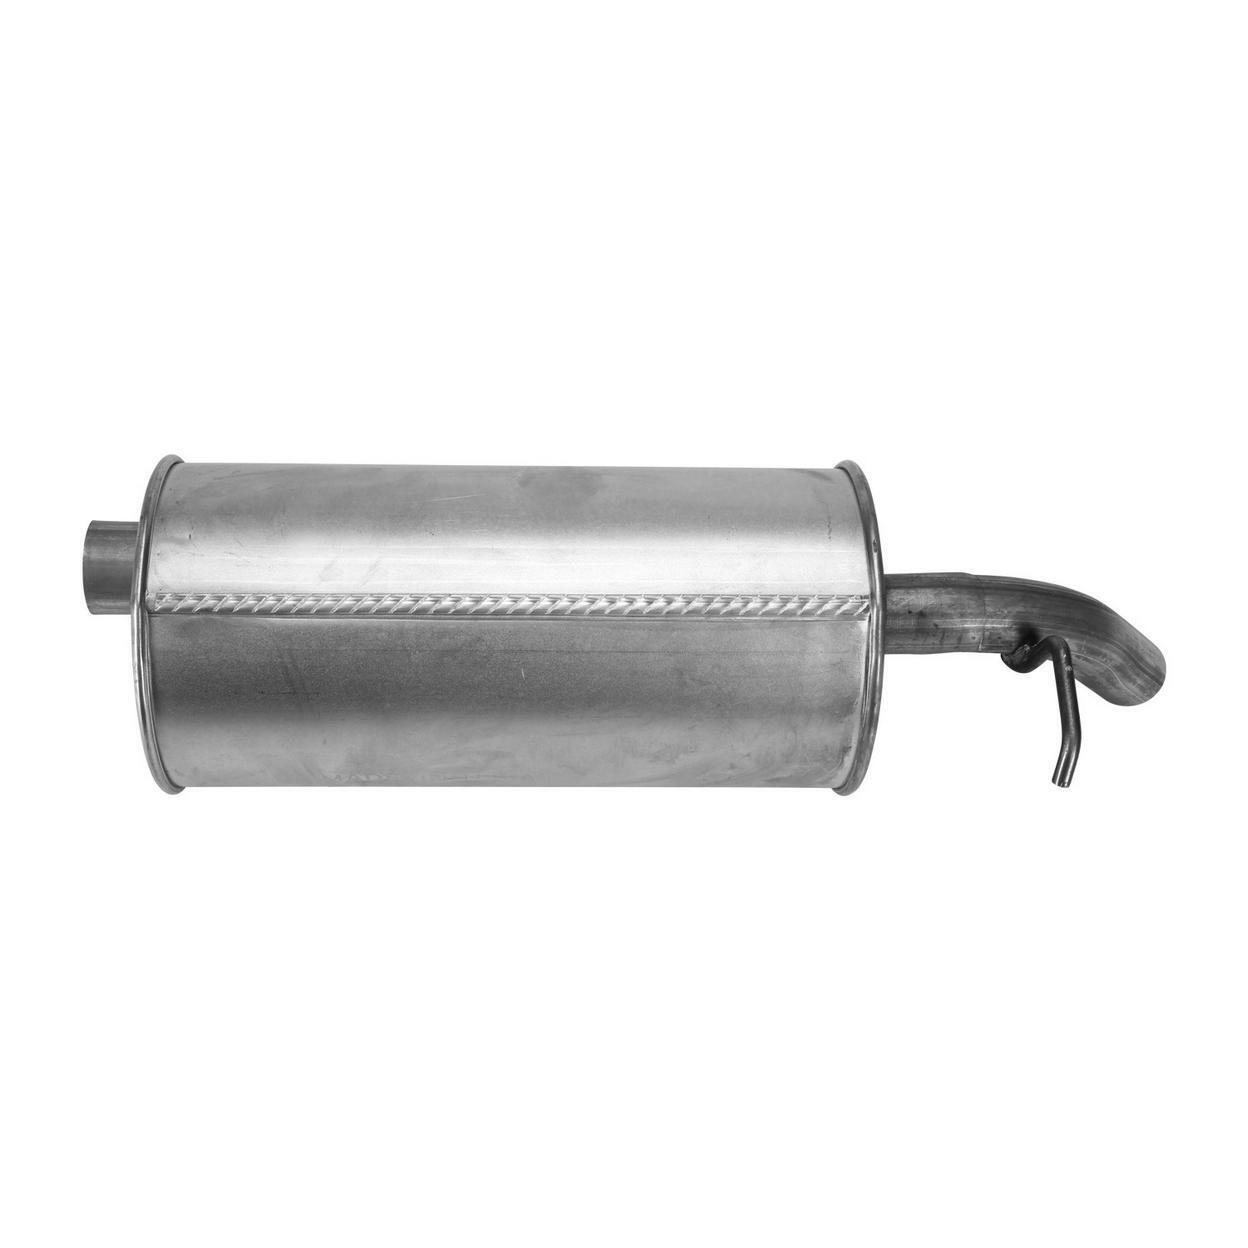 2108-CO Exhaust Muffler Fits 1989 Ford Tempo AWD